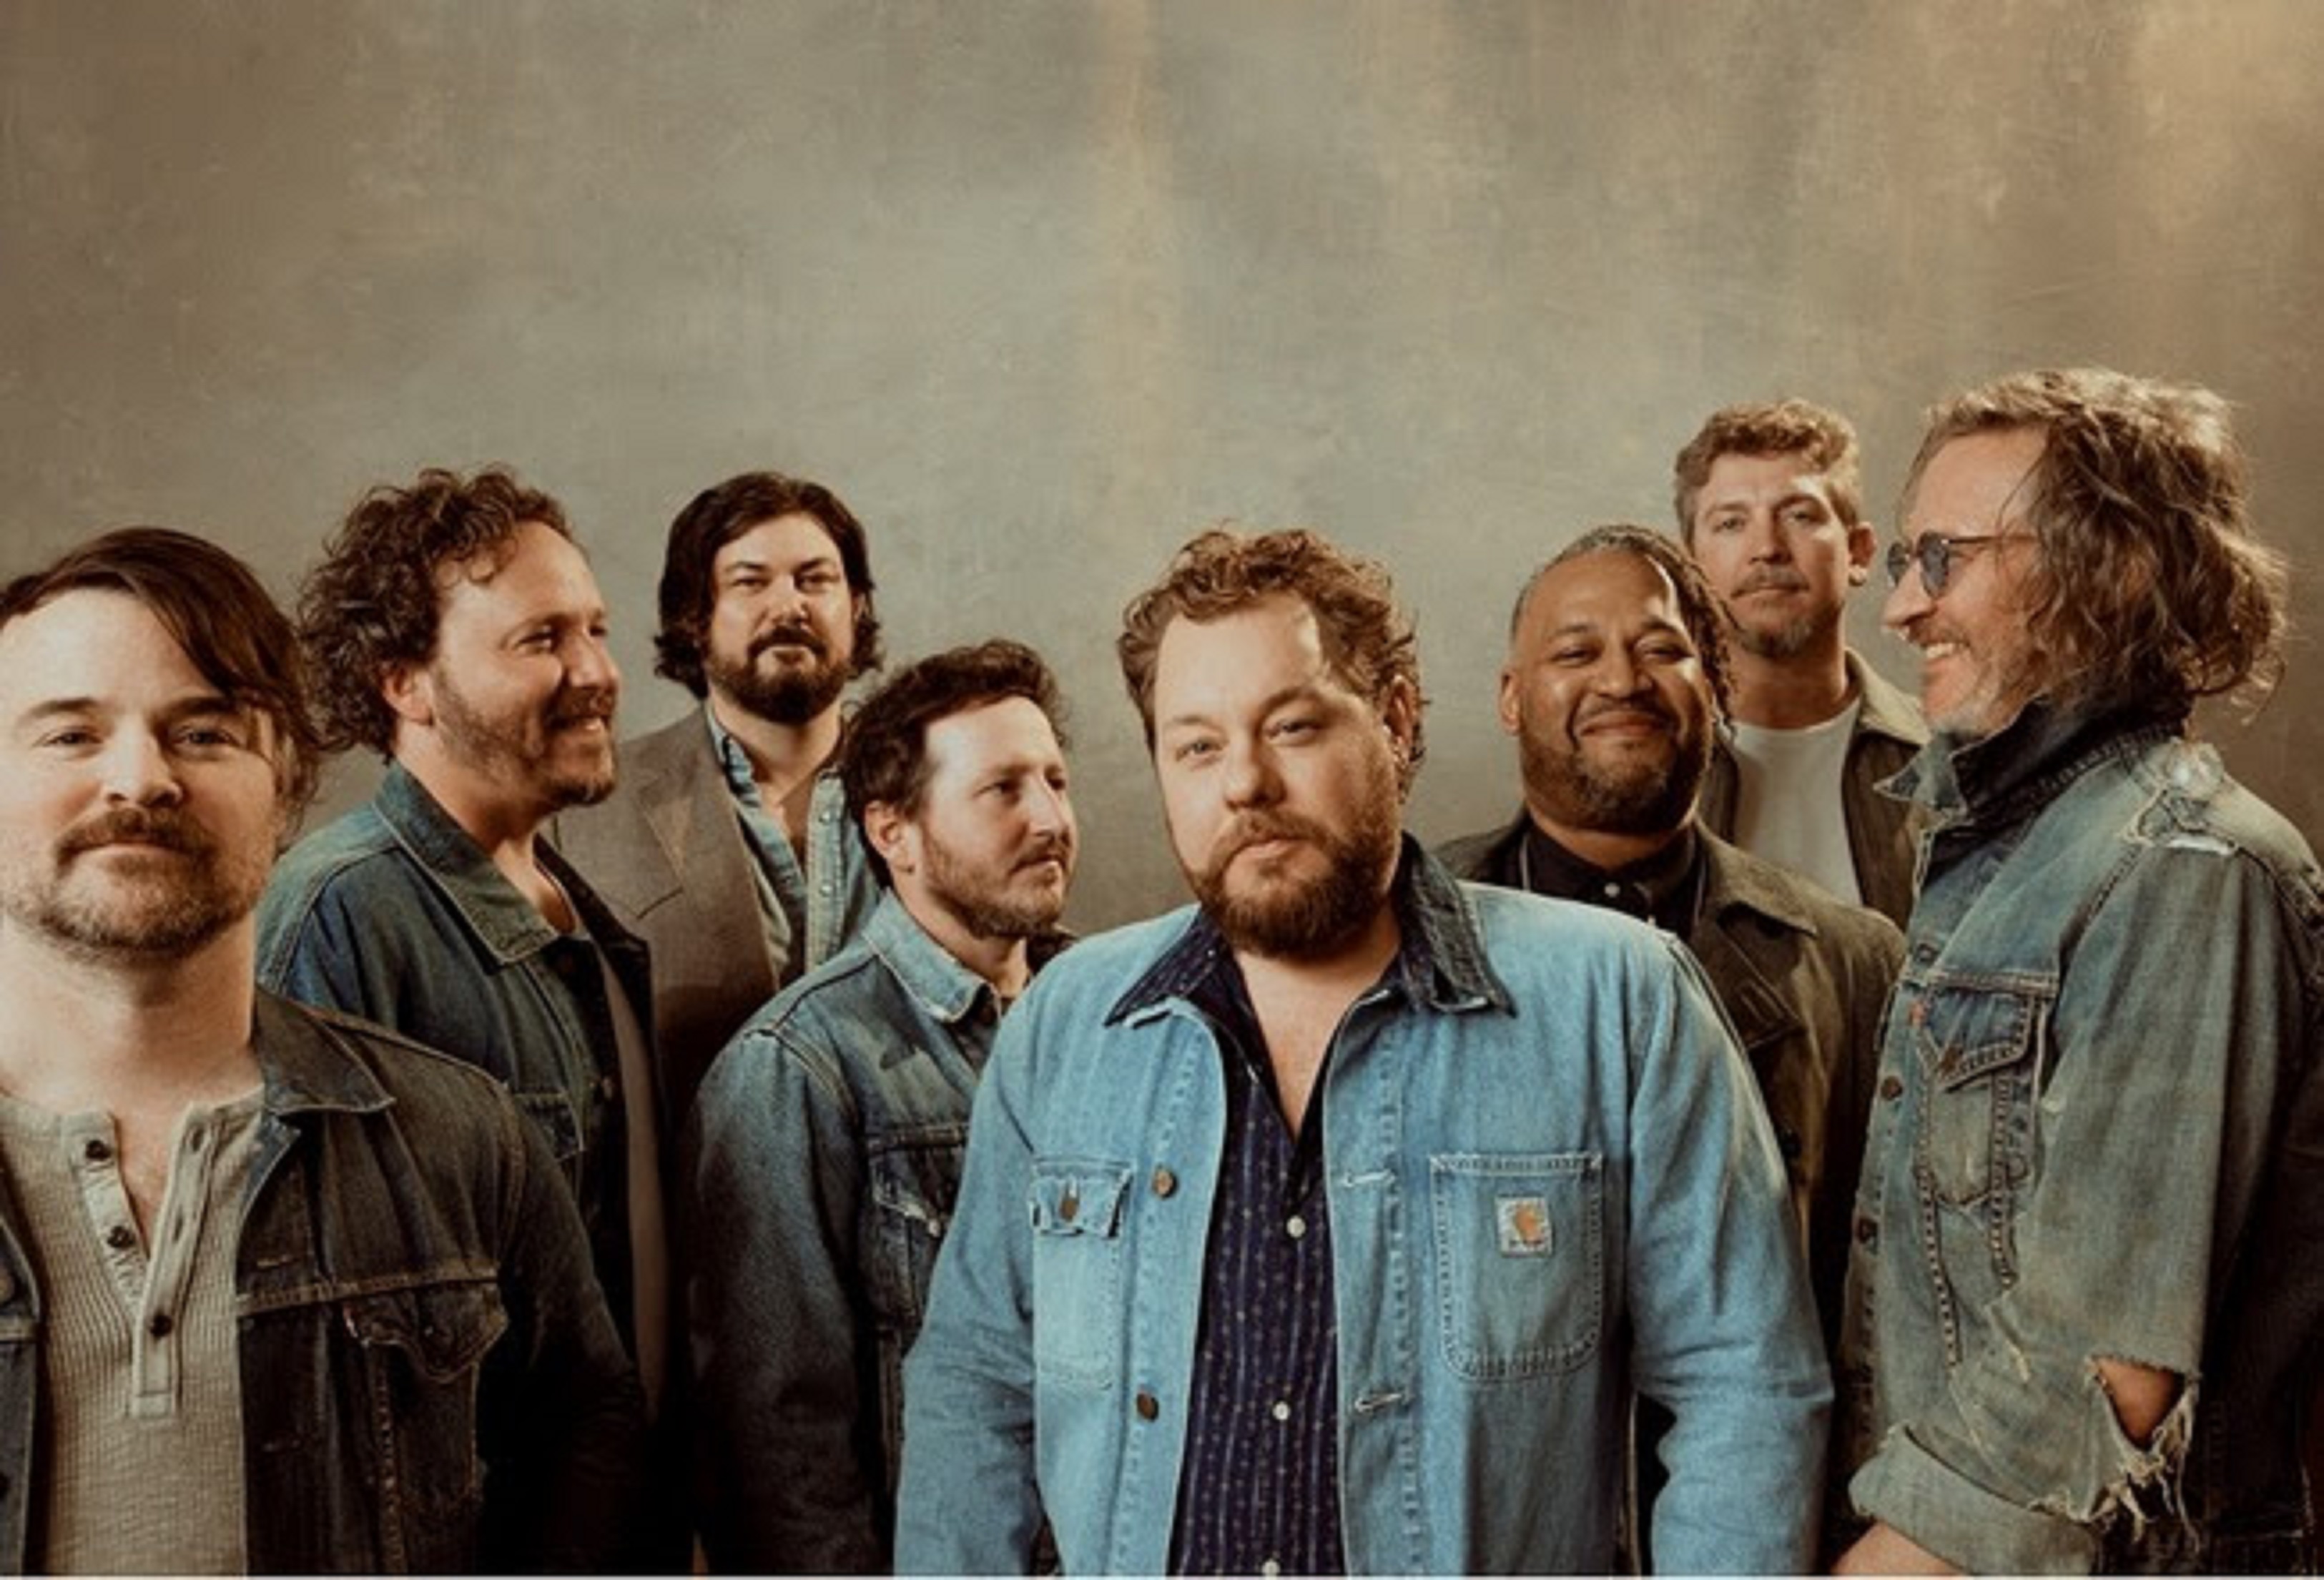 Nathaniel Rateliff & The Night Sweats to embark on first US arena tour, new video for "Heartless" out now!